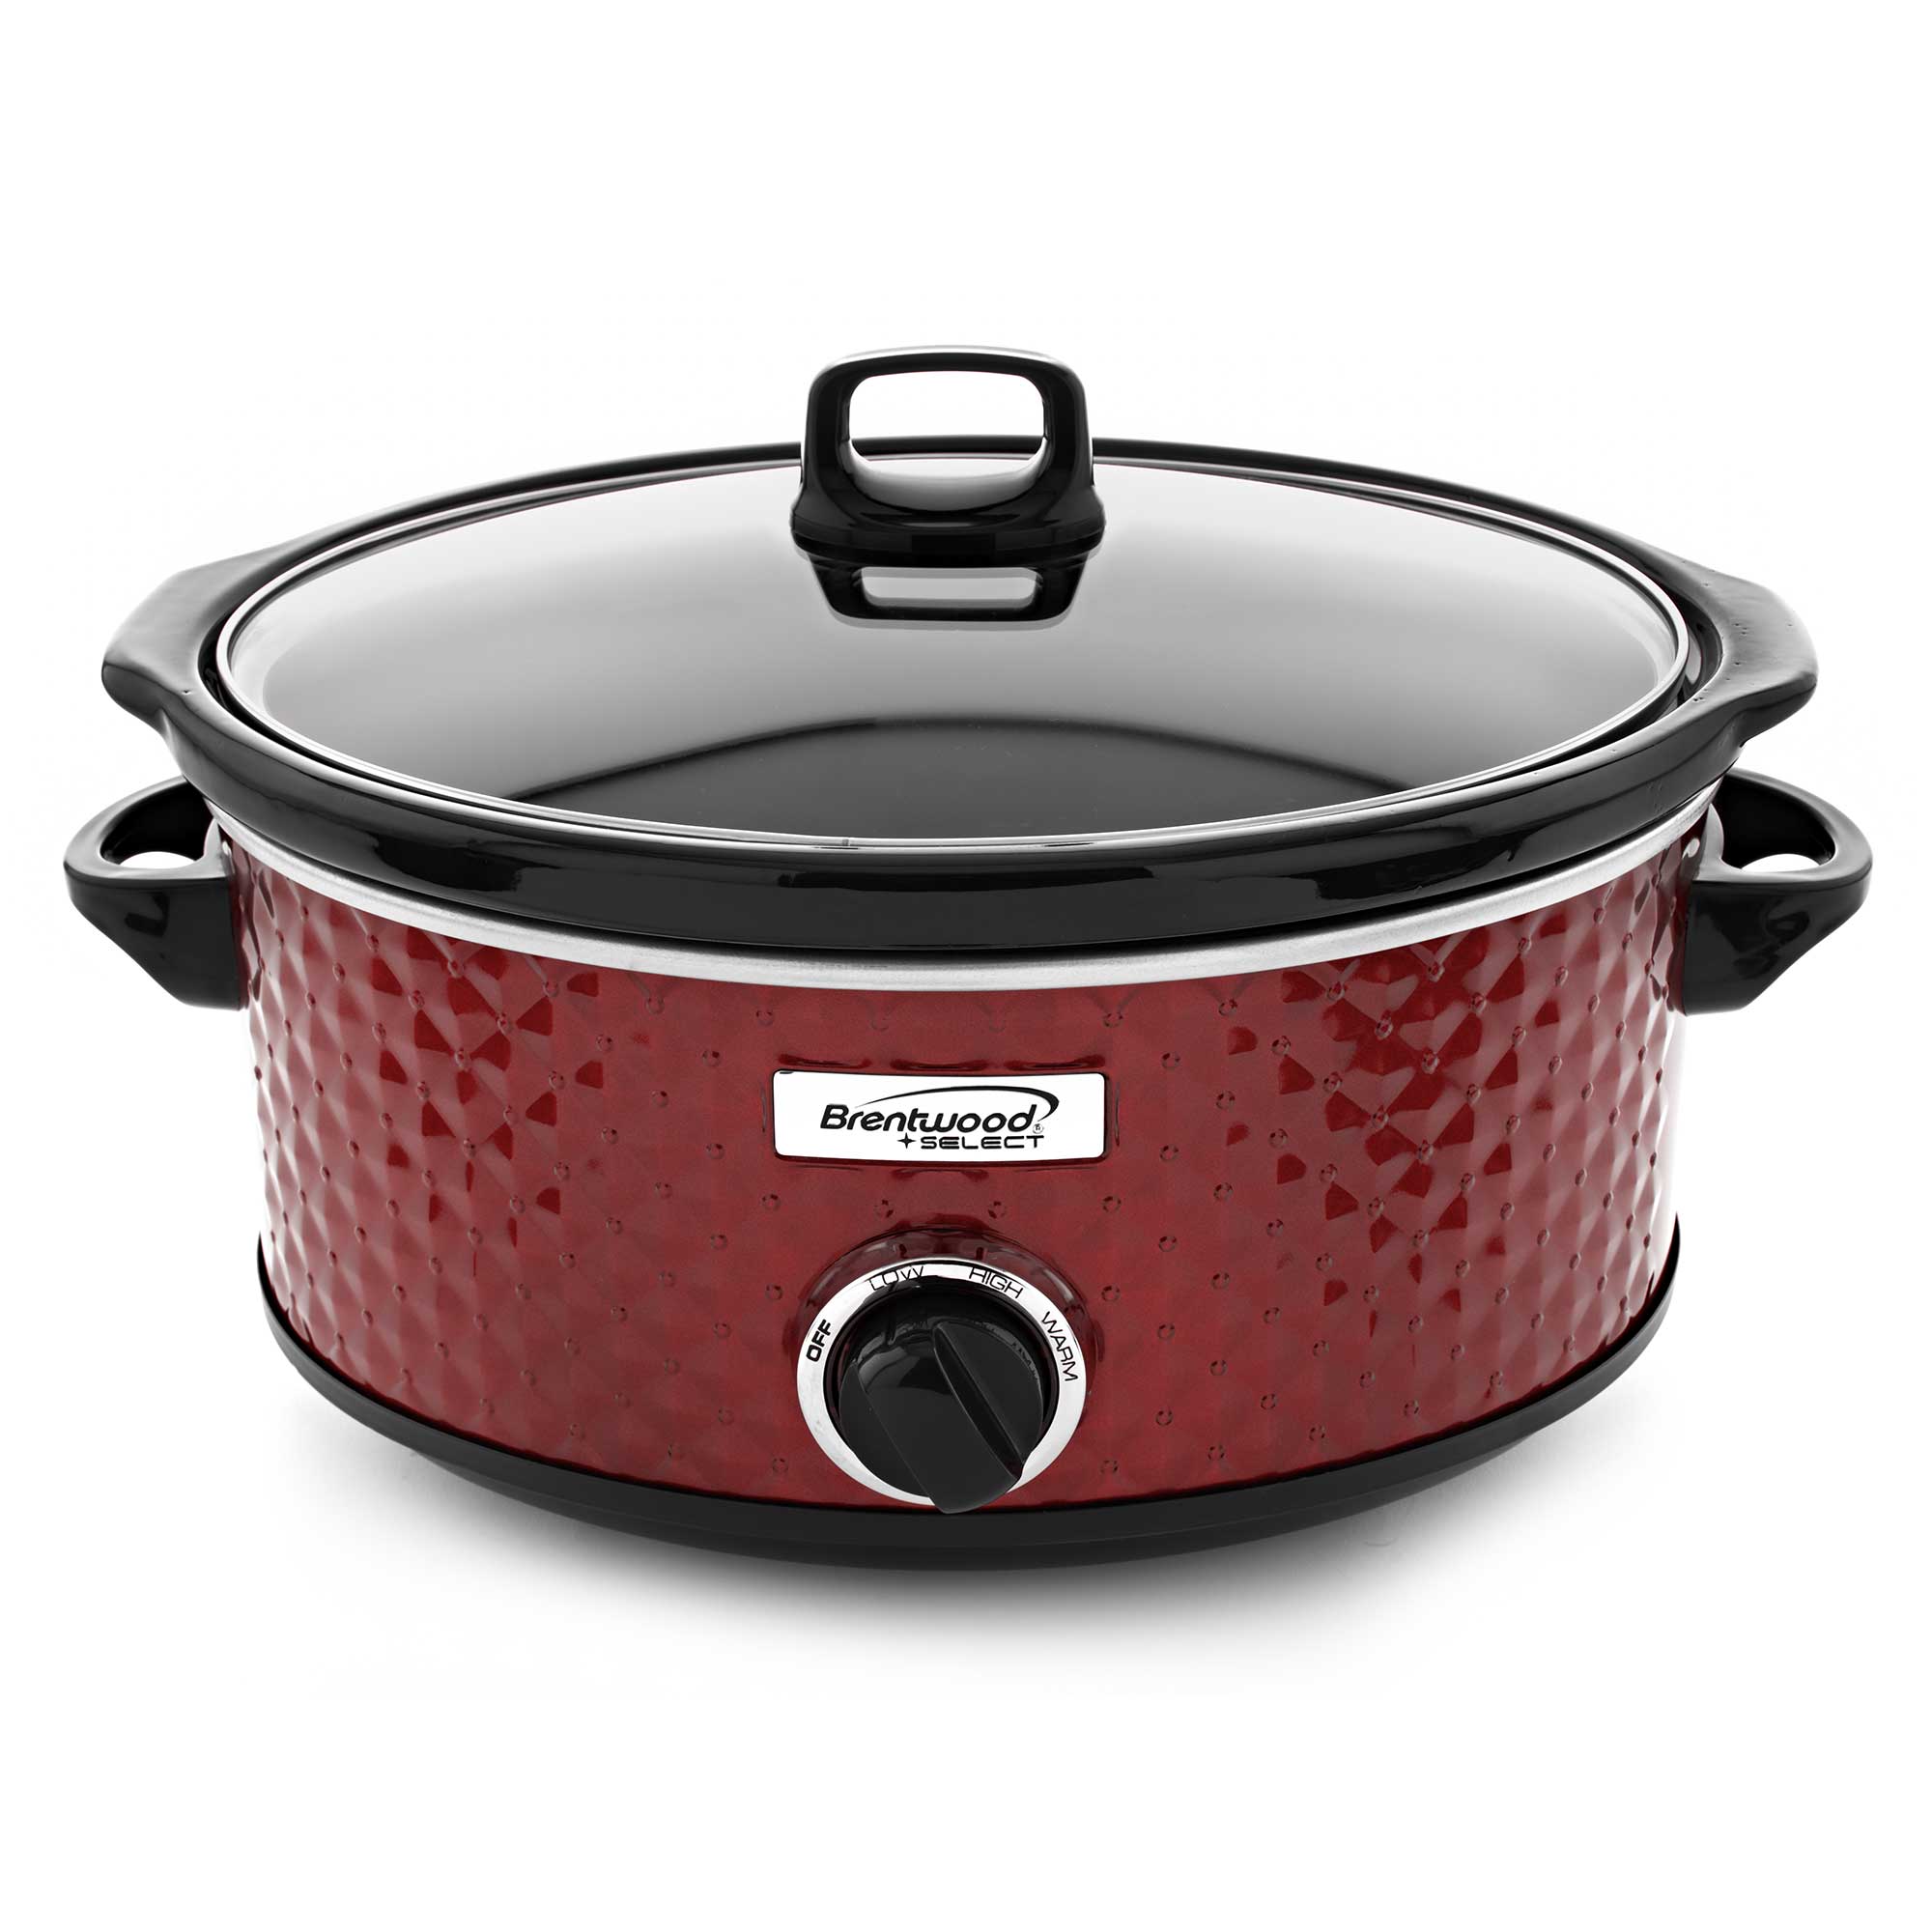 Brentwood Select SC-157R 7 Quart Slow Cooker, Red - Brentwood